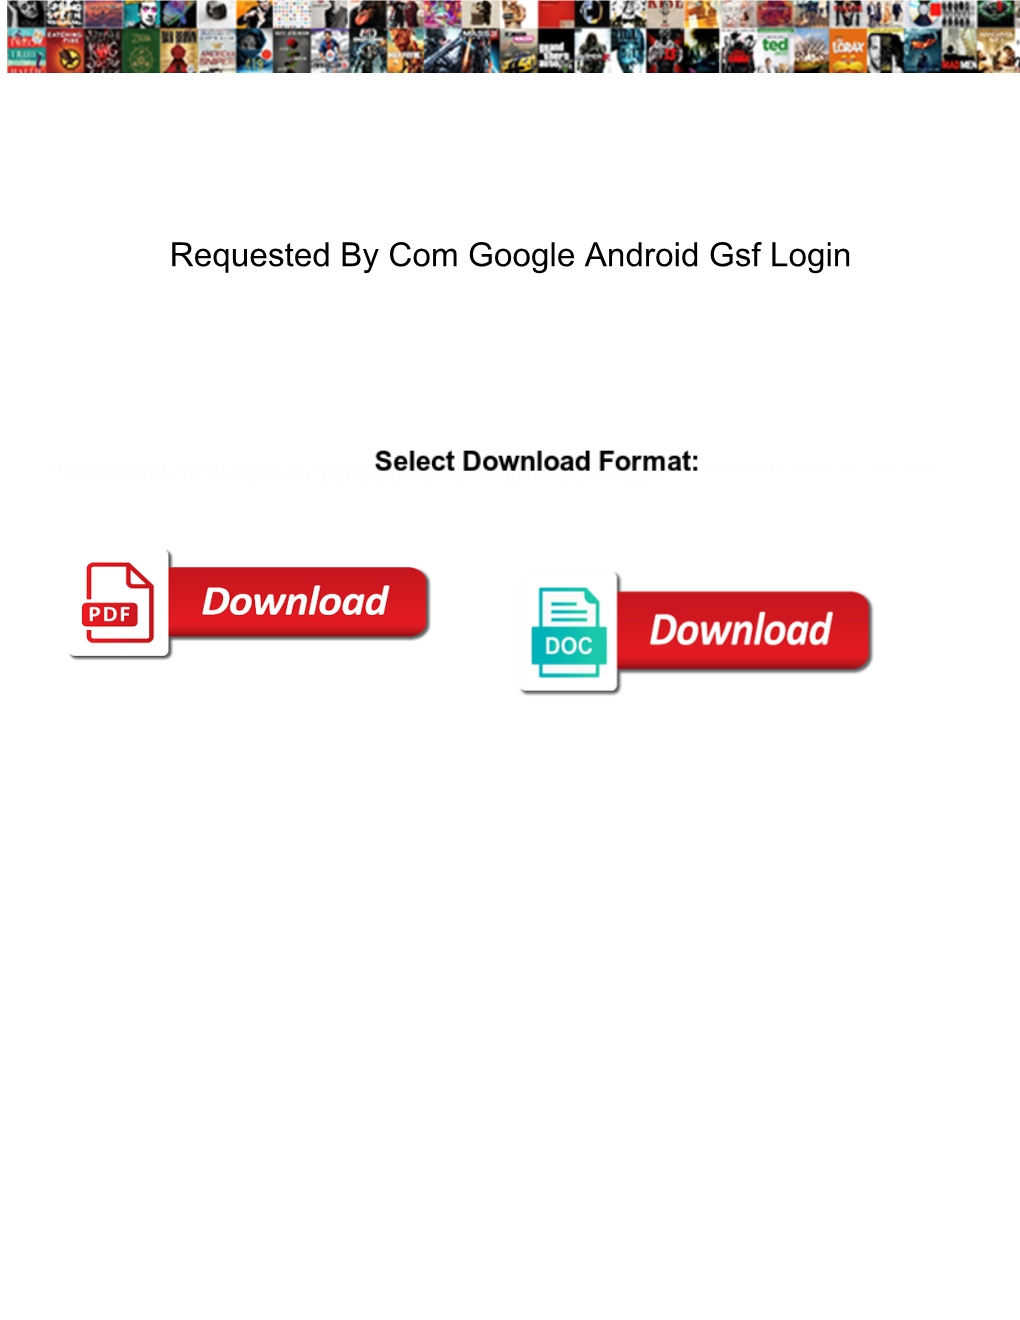 Requested by Com Google Android Gsf Login